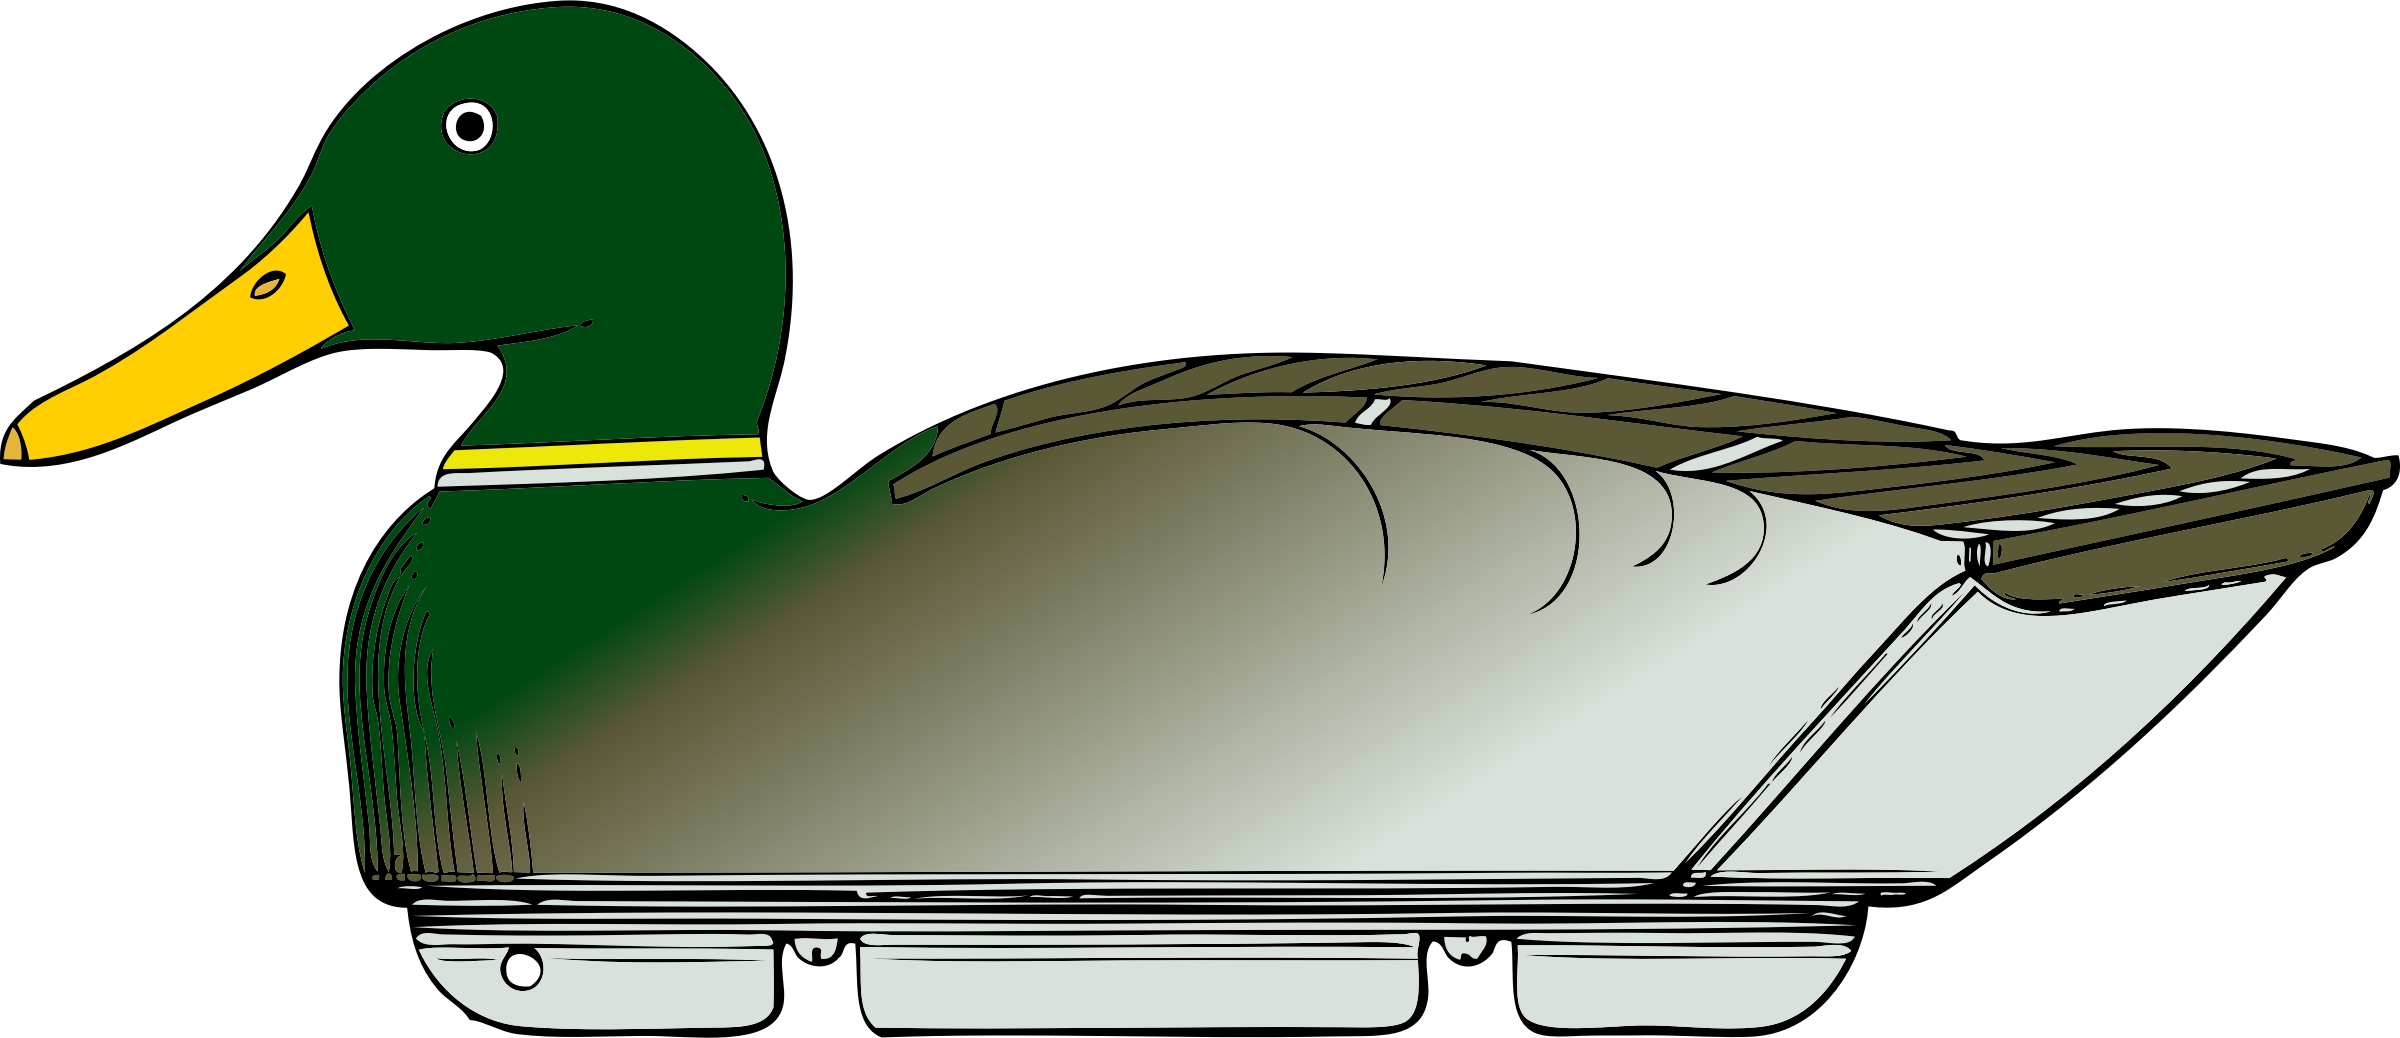 Decoy big image png. Clipart duck side view